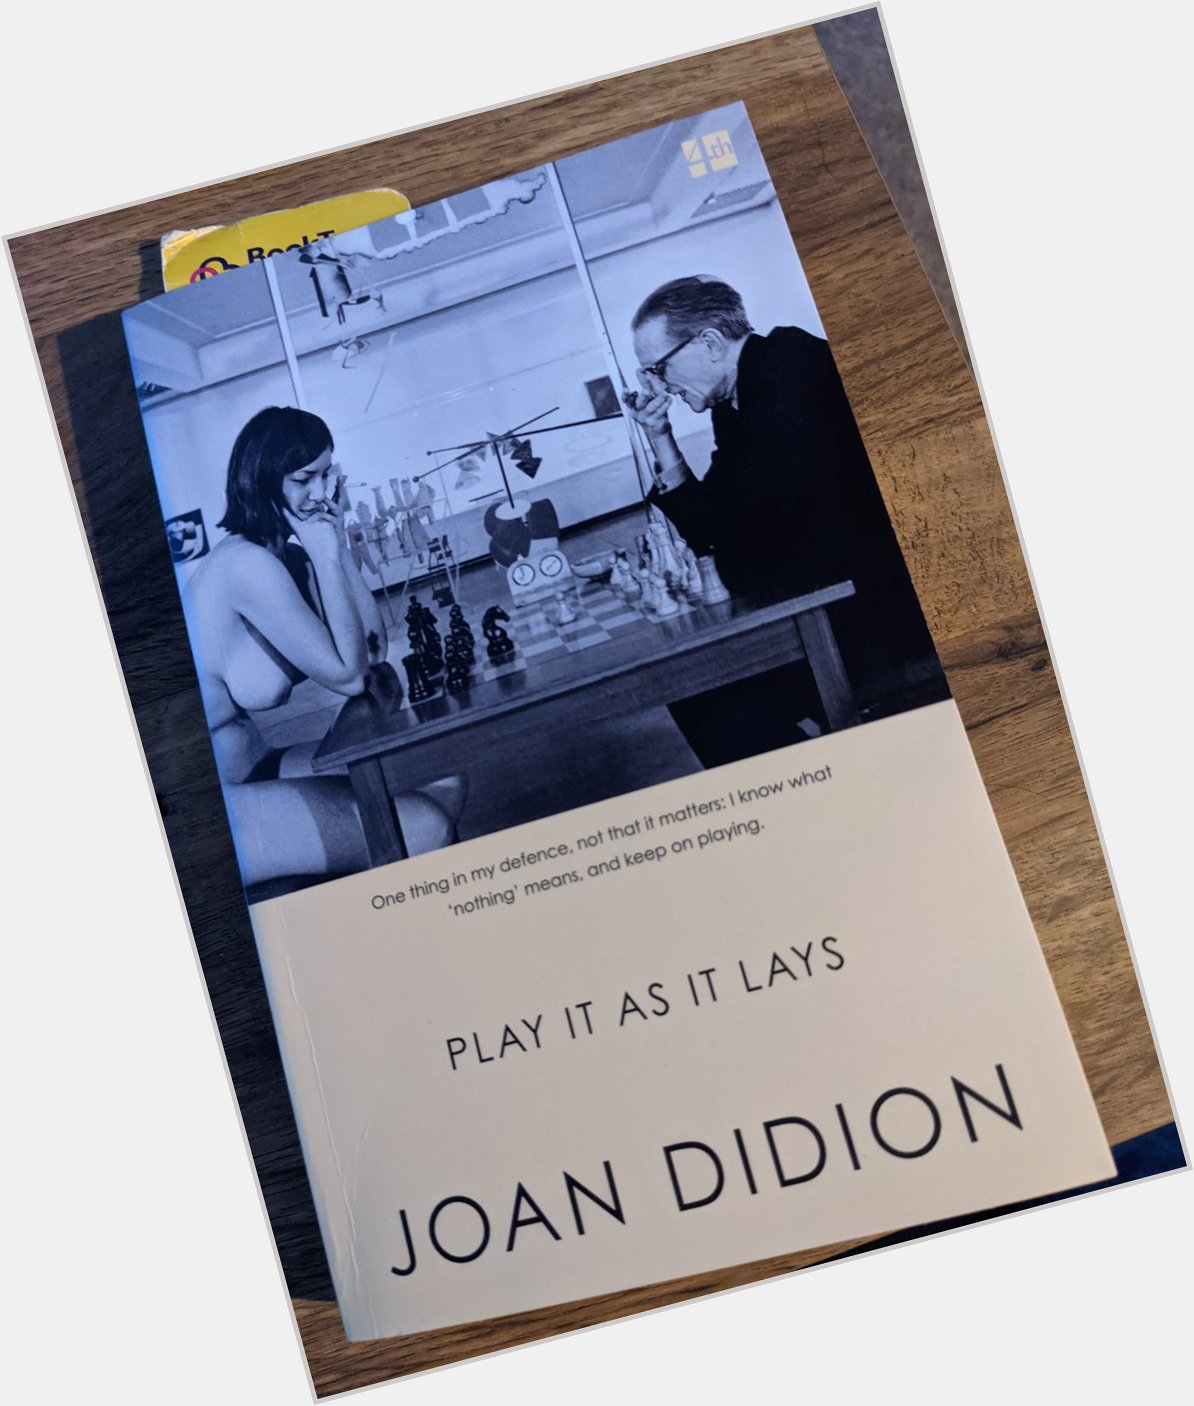 Happy birthday to the one and only Joan Didion, you absolute legend 